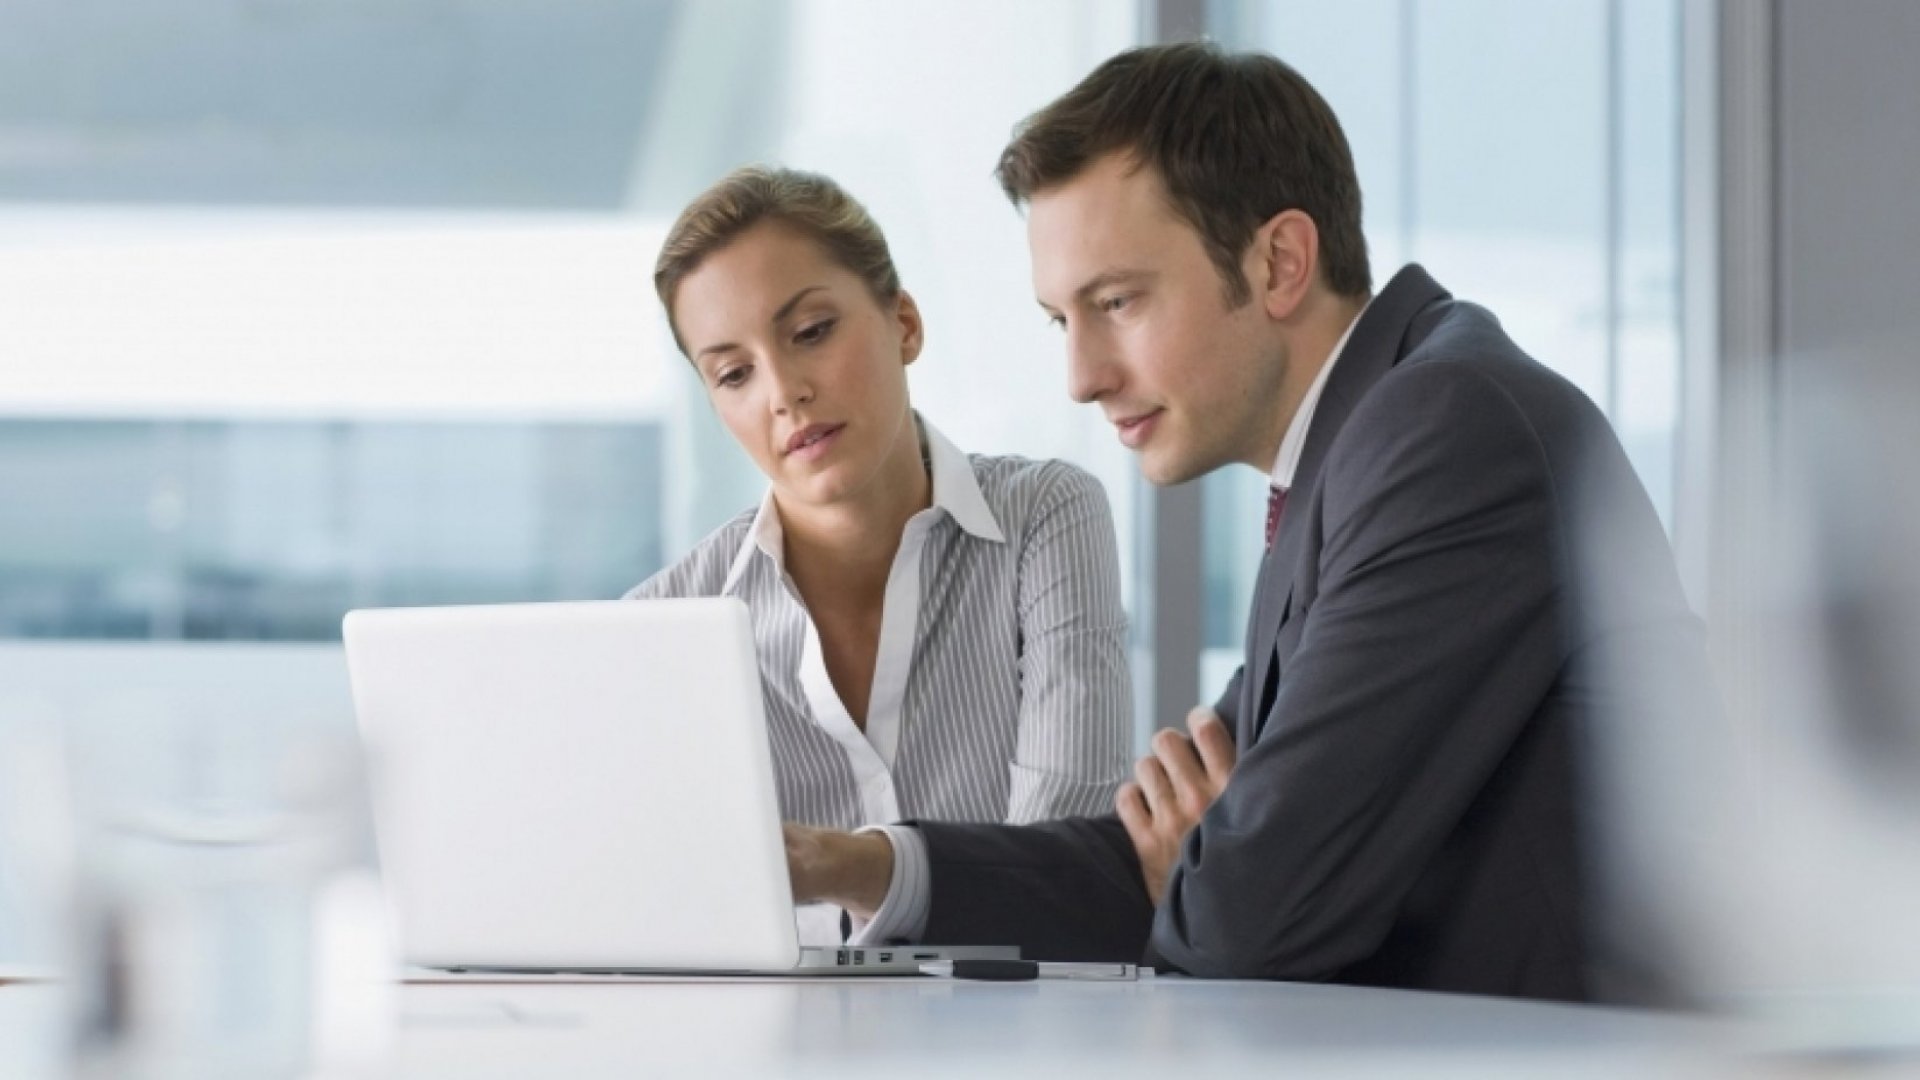 A man wearing a grey suit sitting beside a woman wearing a shirt as both of them stare at a laptop